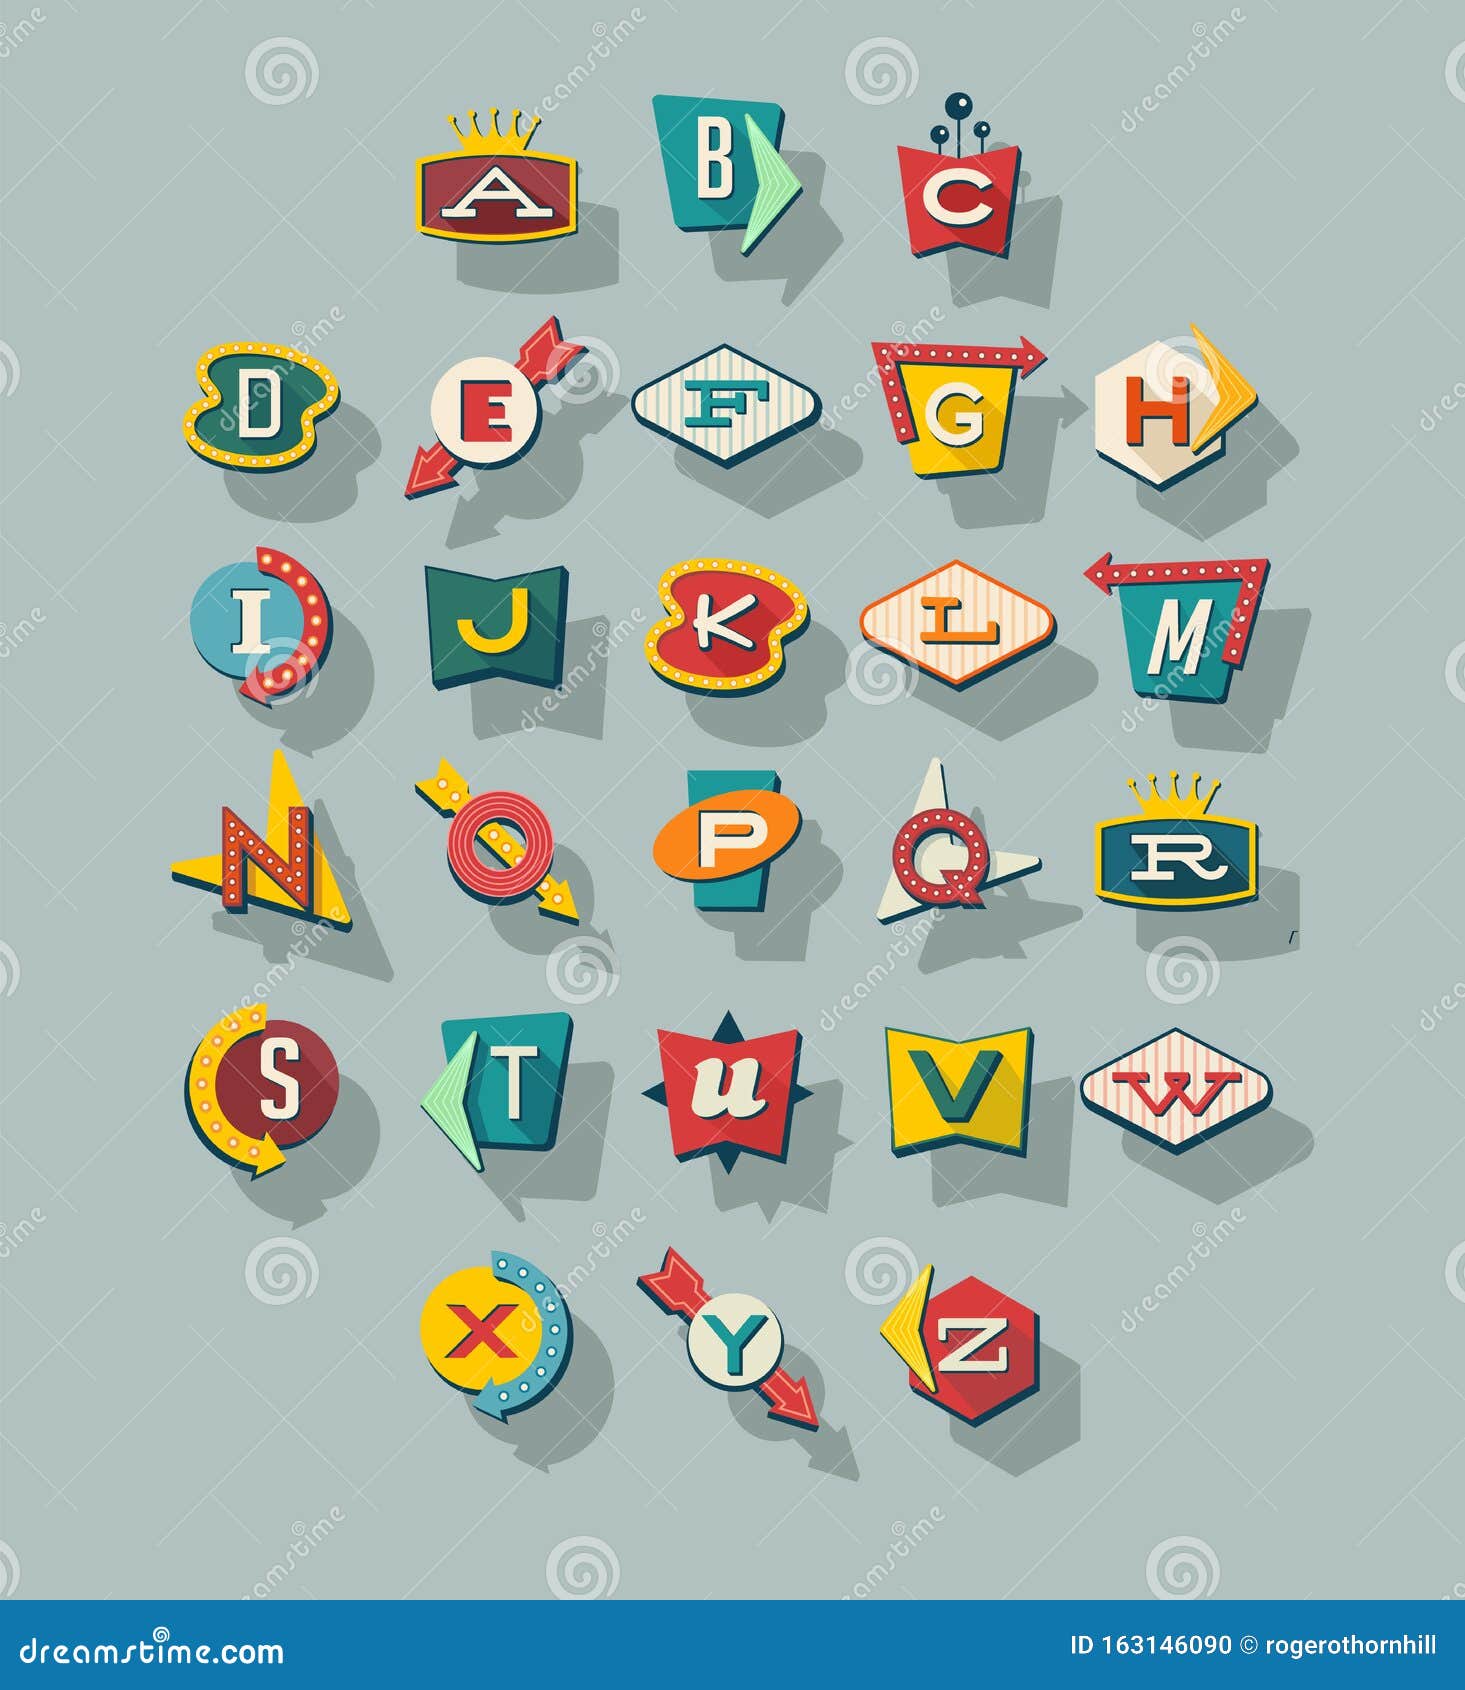 dimensional retro style signs alphabet. letters on vintage style signs.